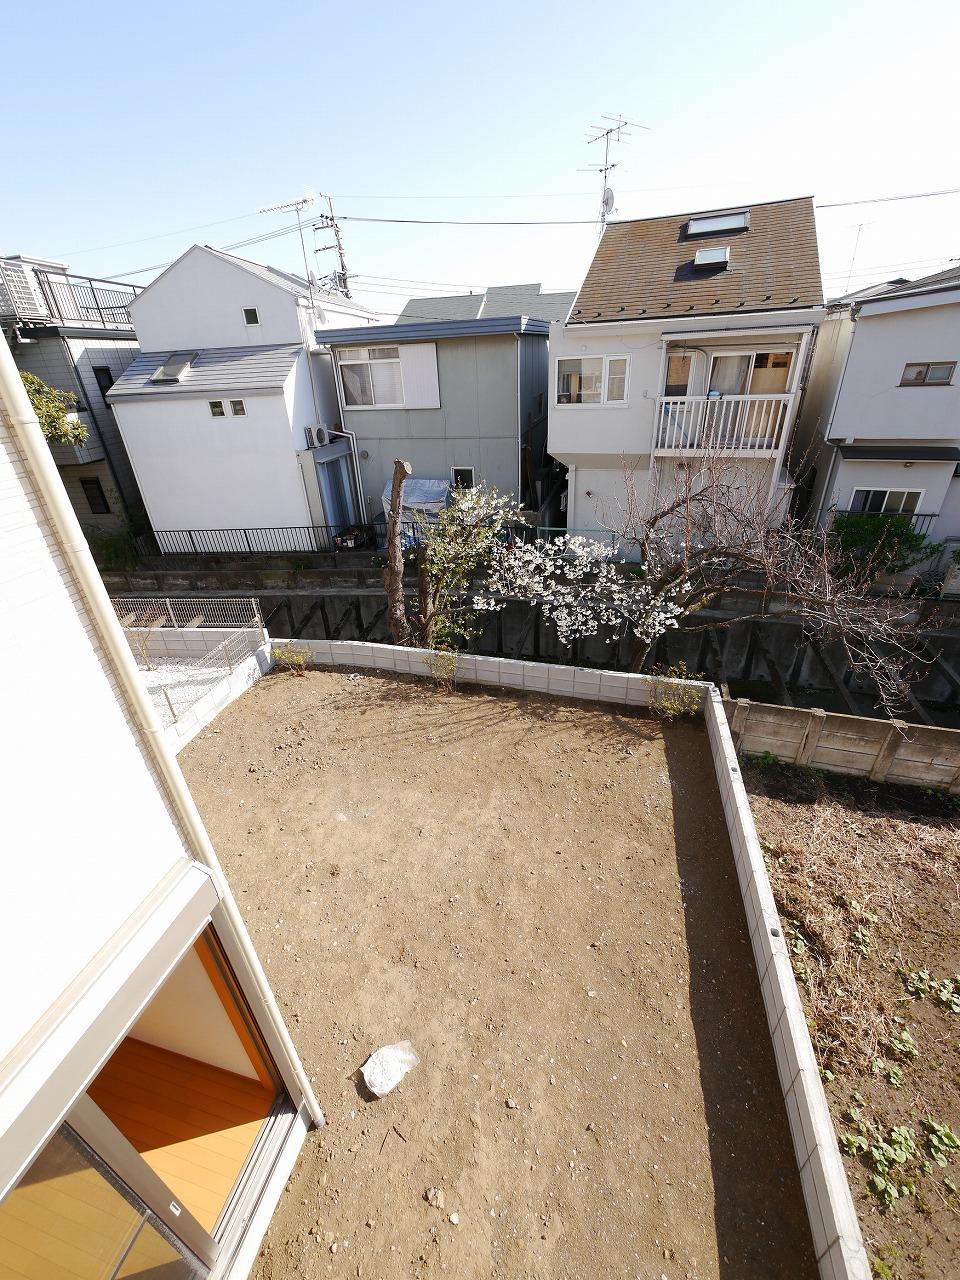 View photos from the dwelling unit. Overlooking the spacious garden from the second floor balcony